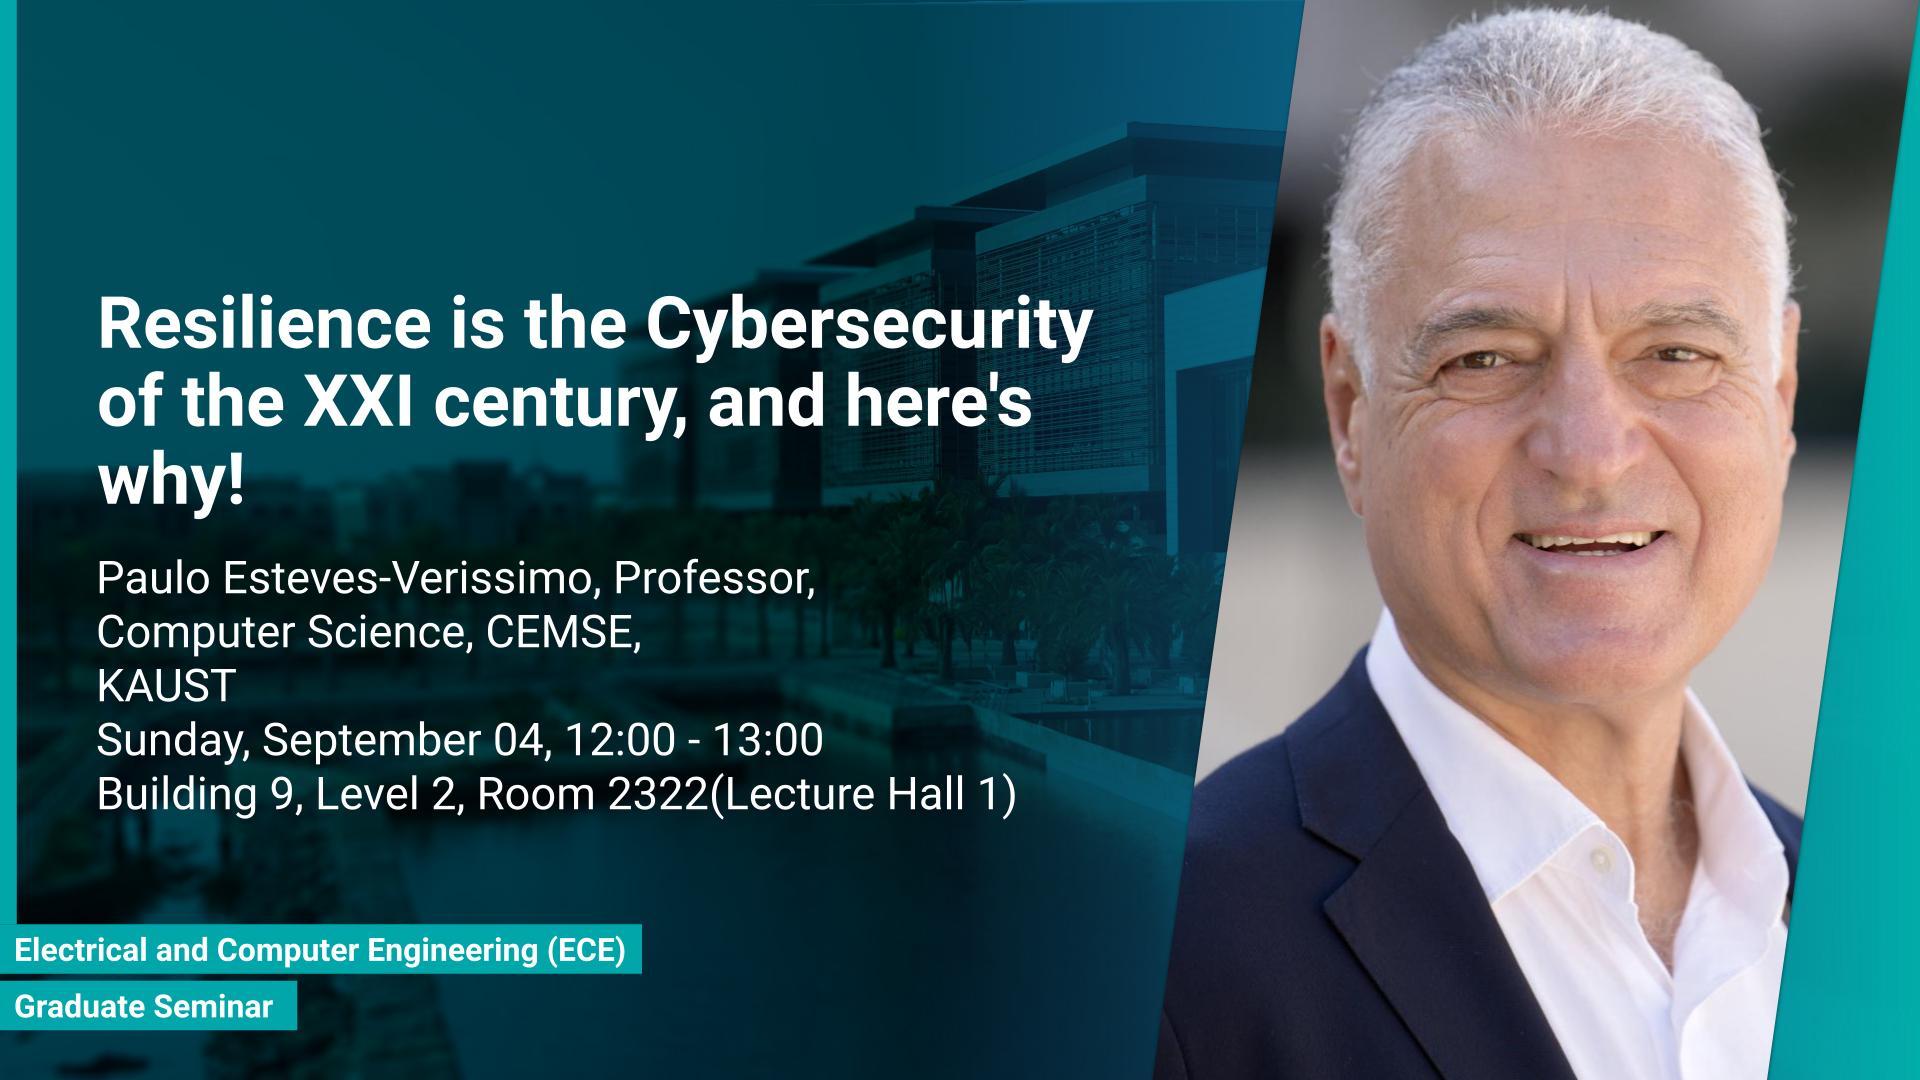 KAUST CEMSE ECE Graduate Seminar Paulo Esteves Verissimo Resilience is the Cybersecurity of the XXI century